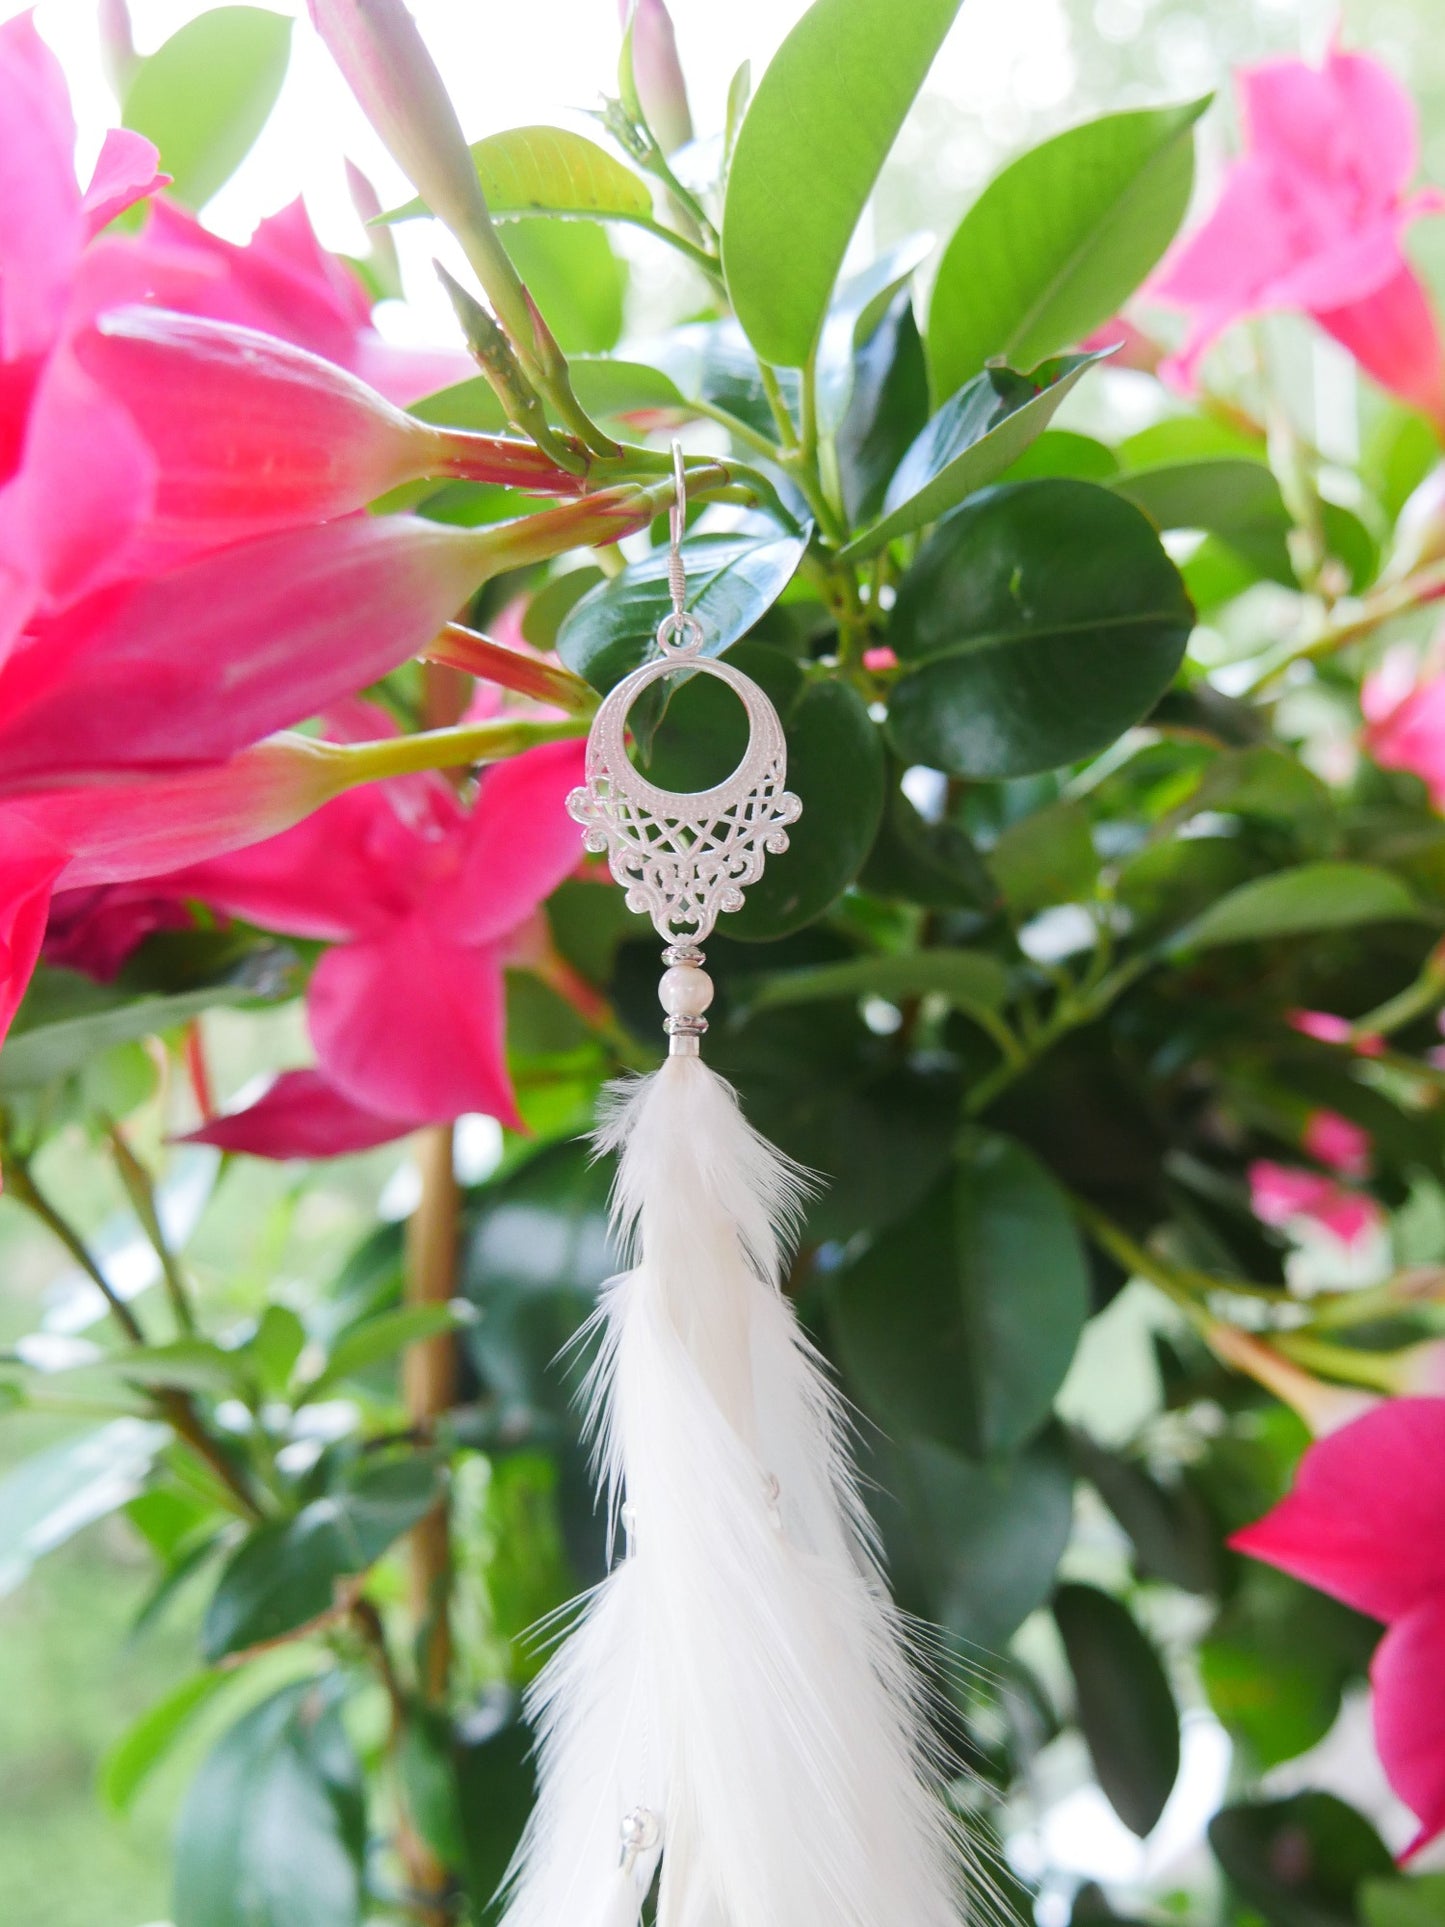 Bohemian Goddess 31 cm long single feather earring named Moonlight with white feathers.